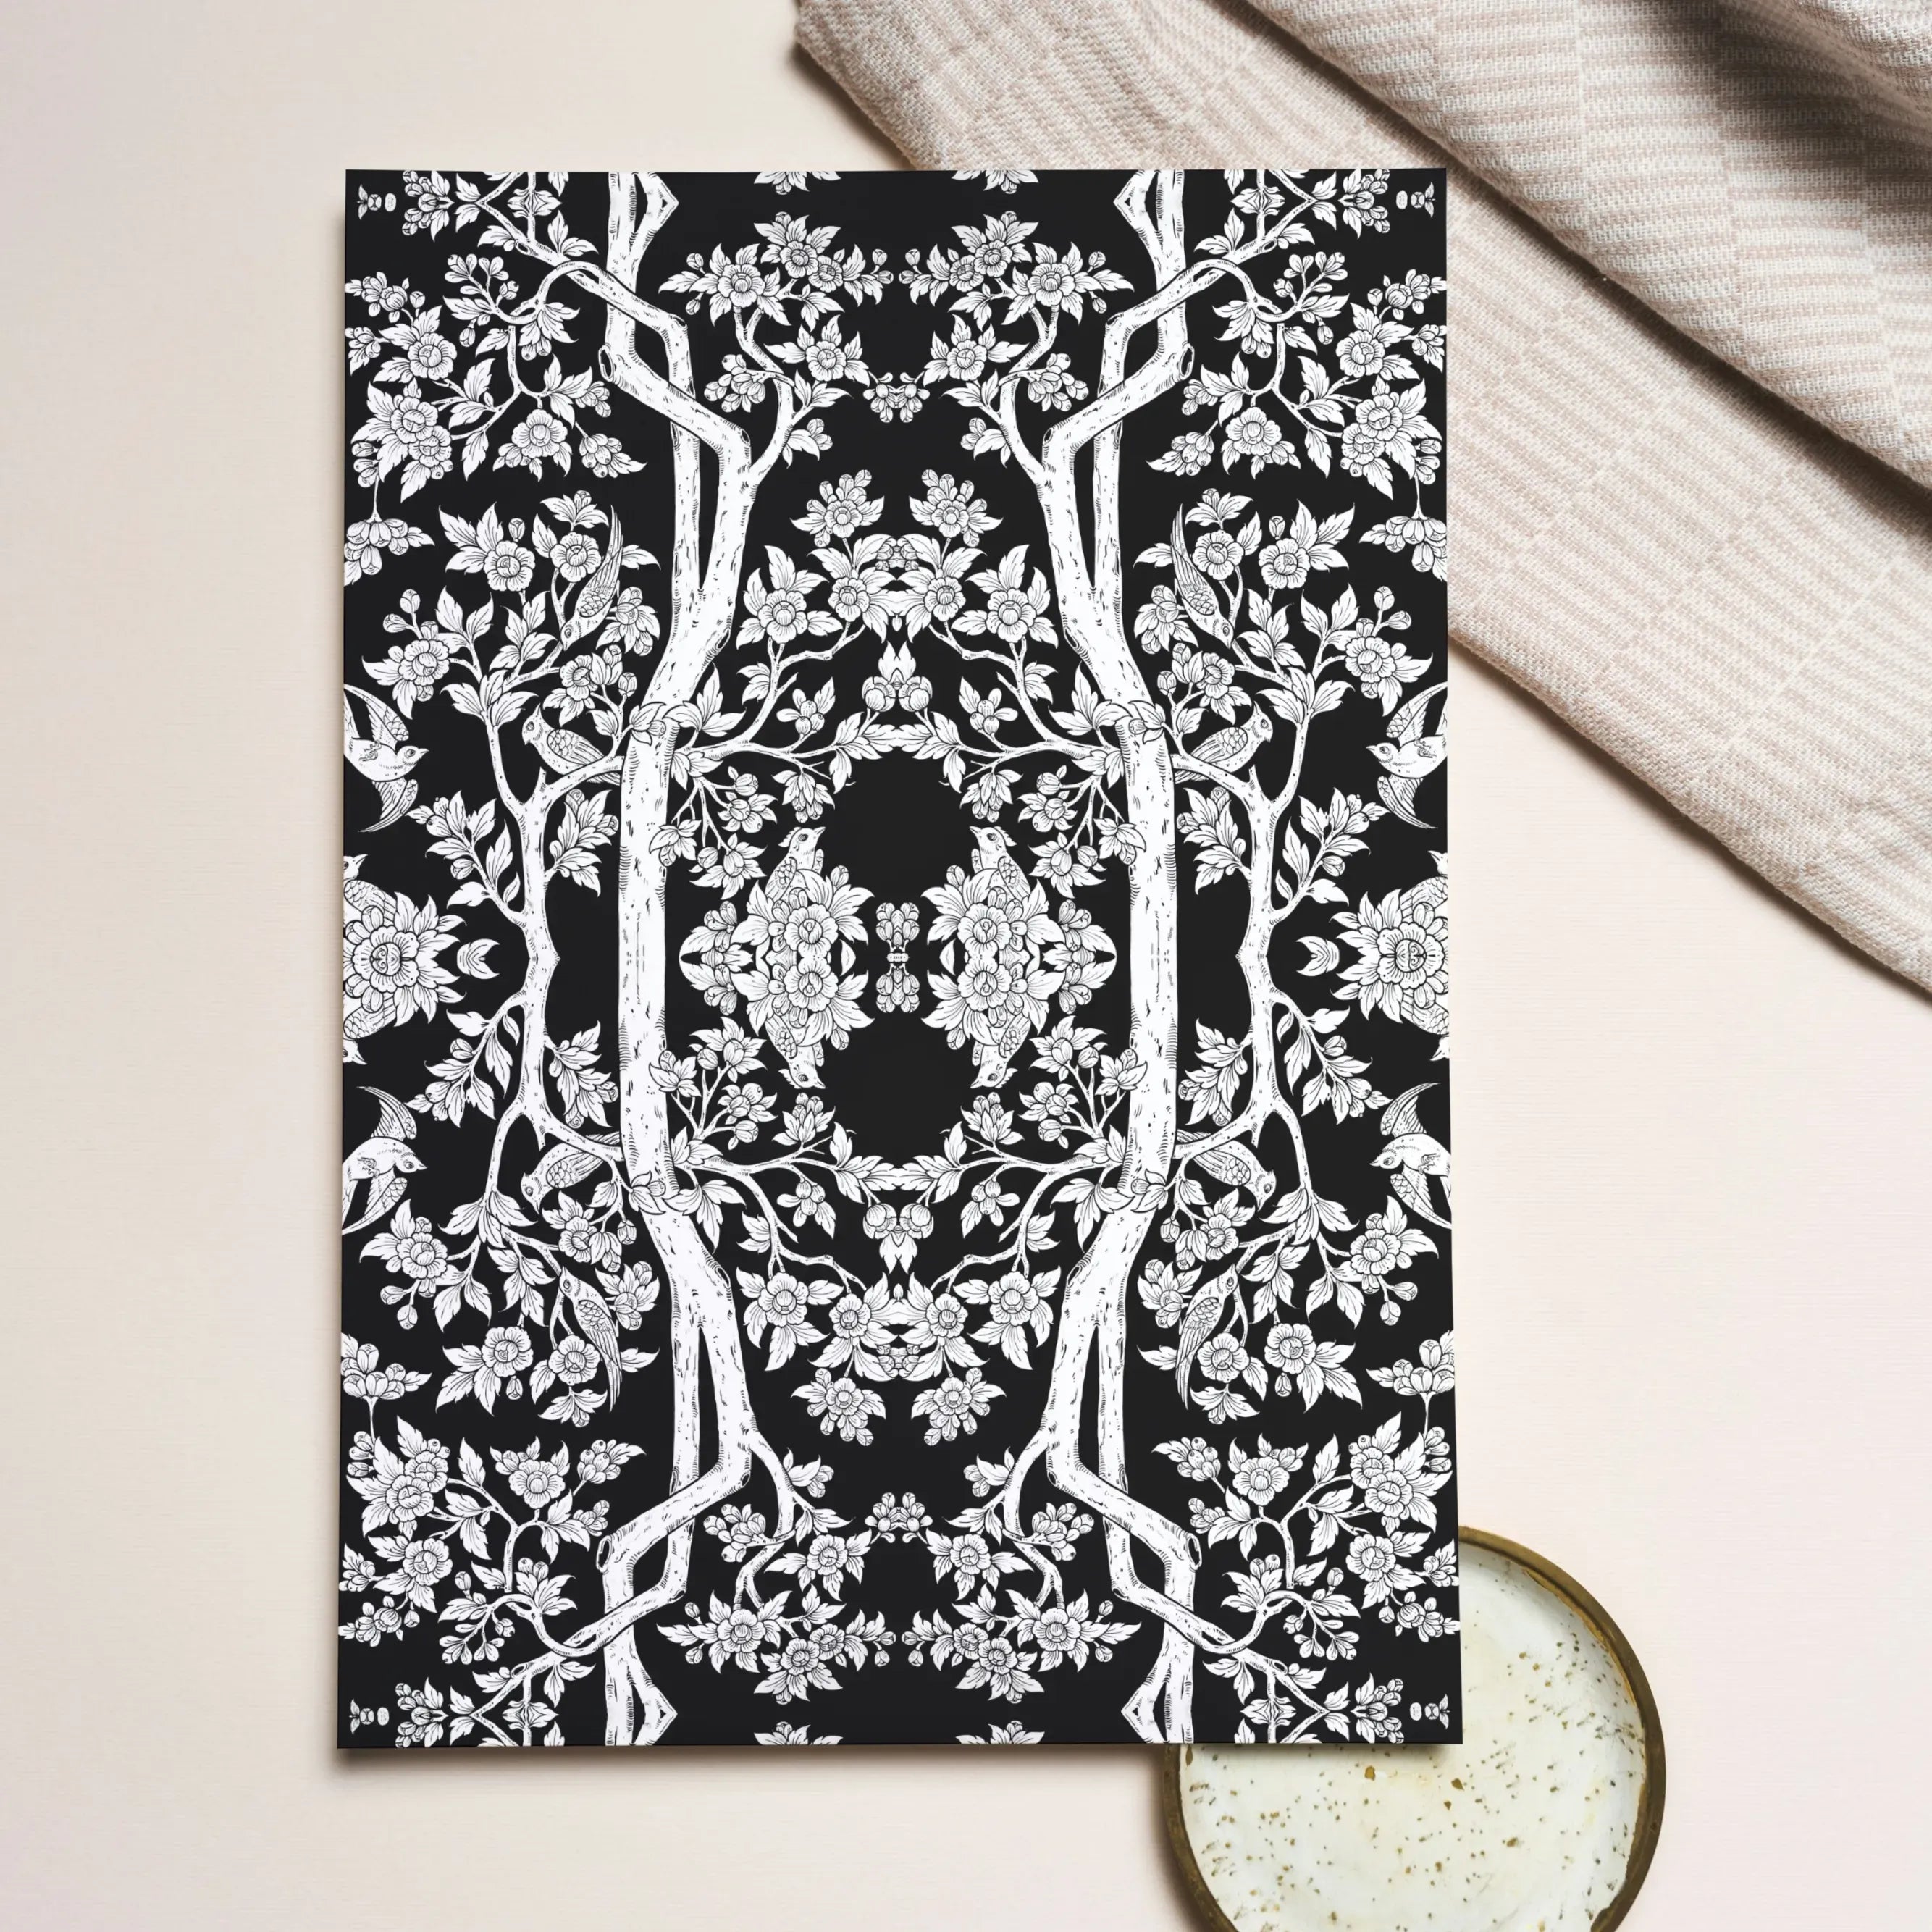 Aviary Black Greeting Card - Greeting & Note Cards - Aesthetic Art